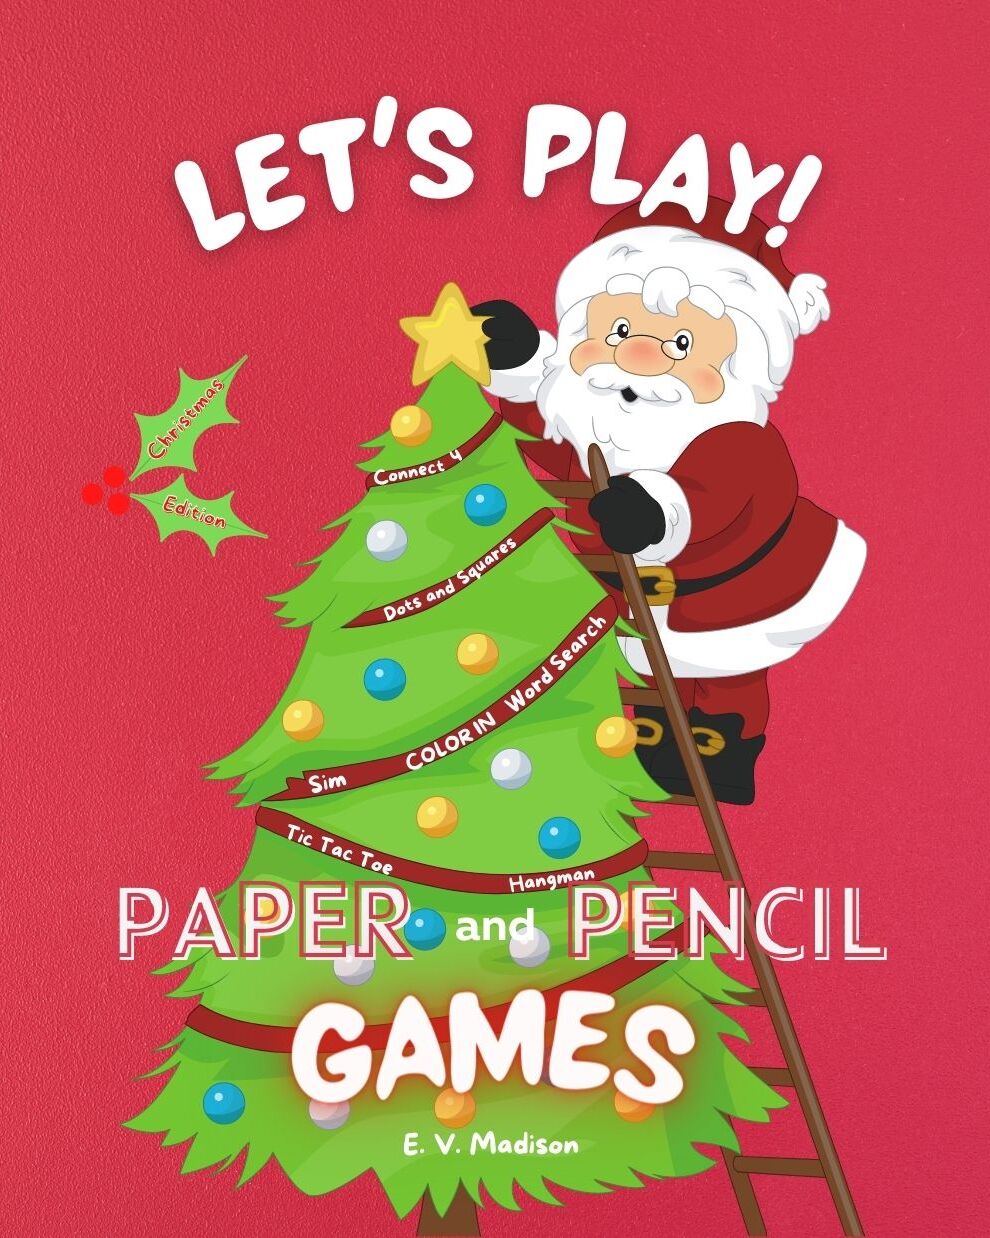 Let's Play! Paper and Pencil Games - Christmas Edition